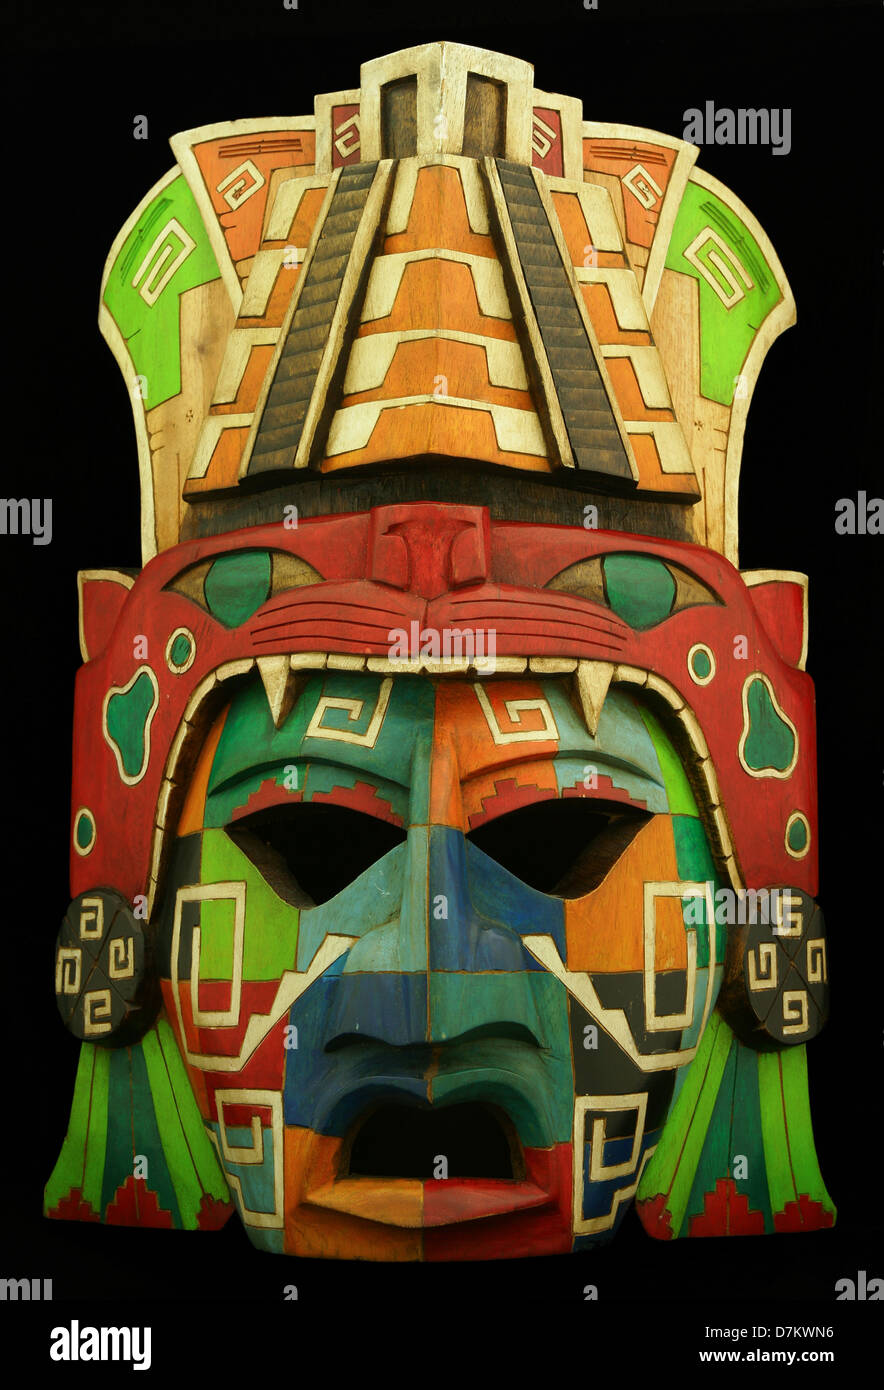 Wooden Mayan mask on a black background Stock Photo